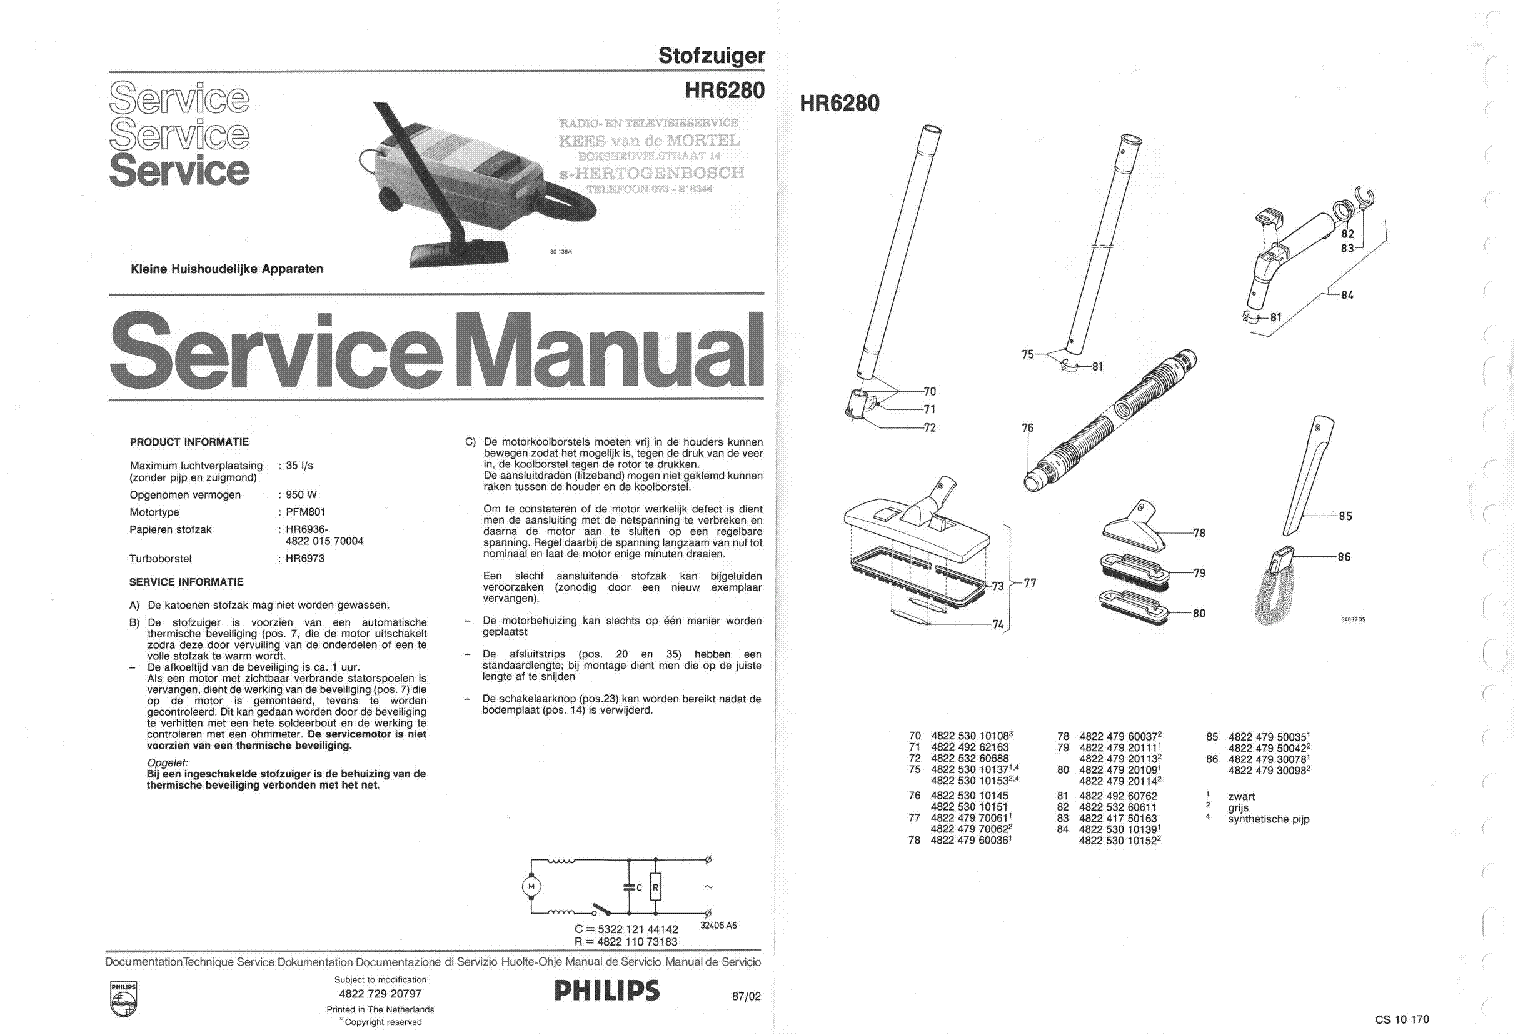 PHILIPS HR6280 SM service manual (1st page)